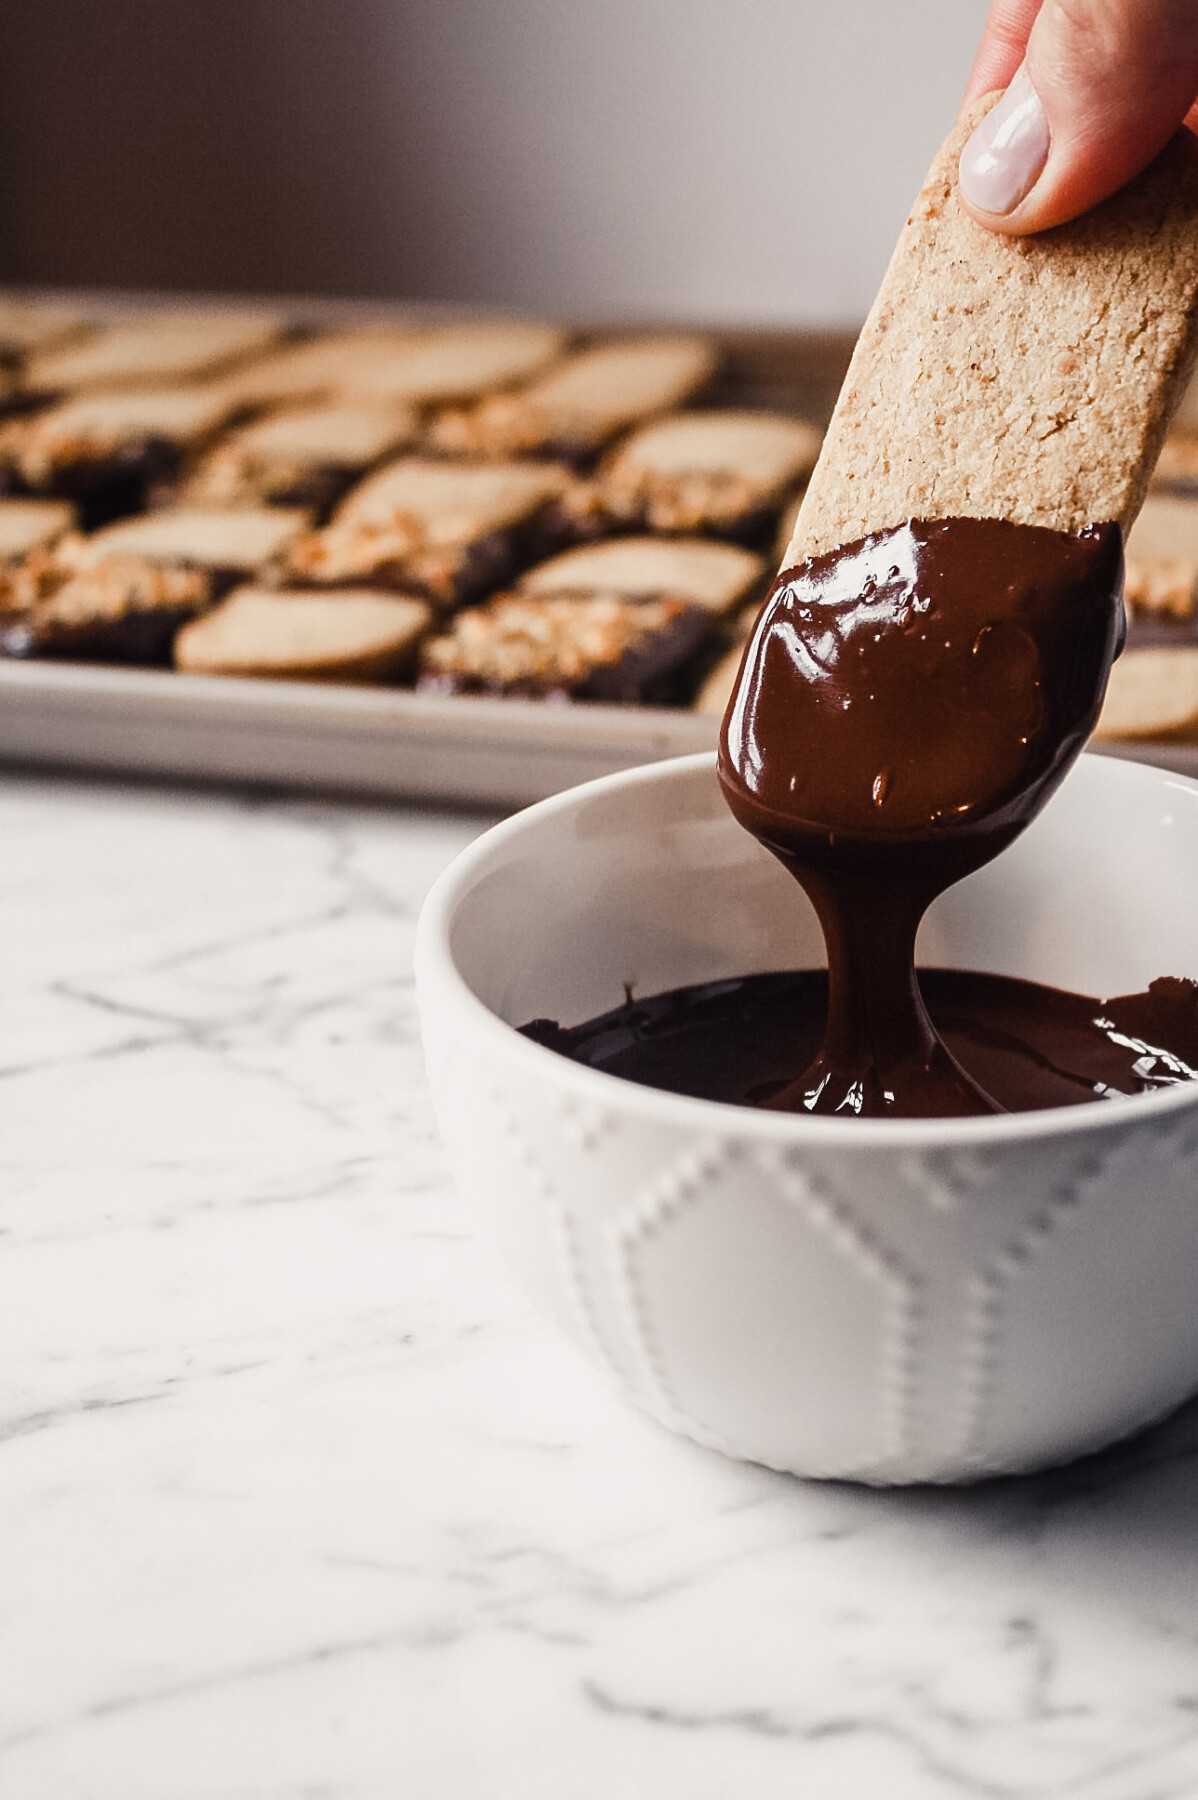 Photograph of shortbread cookie being dunked in melted dark chocolate